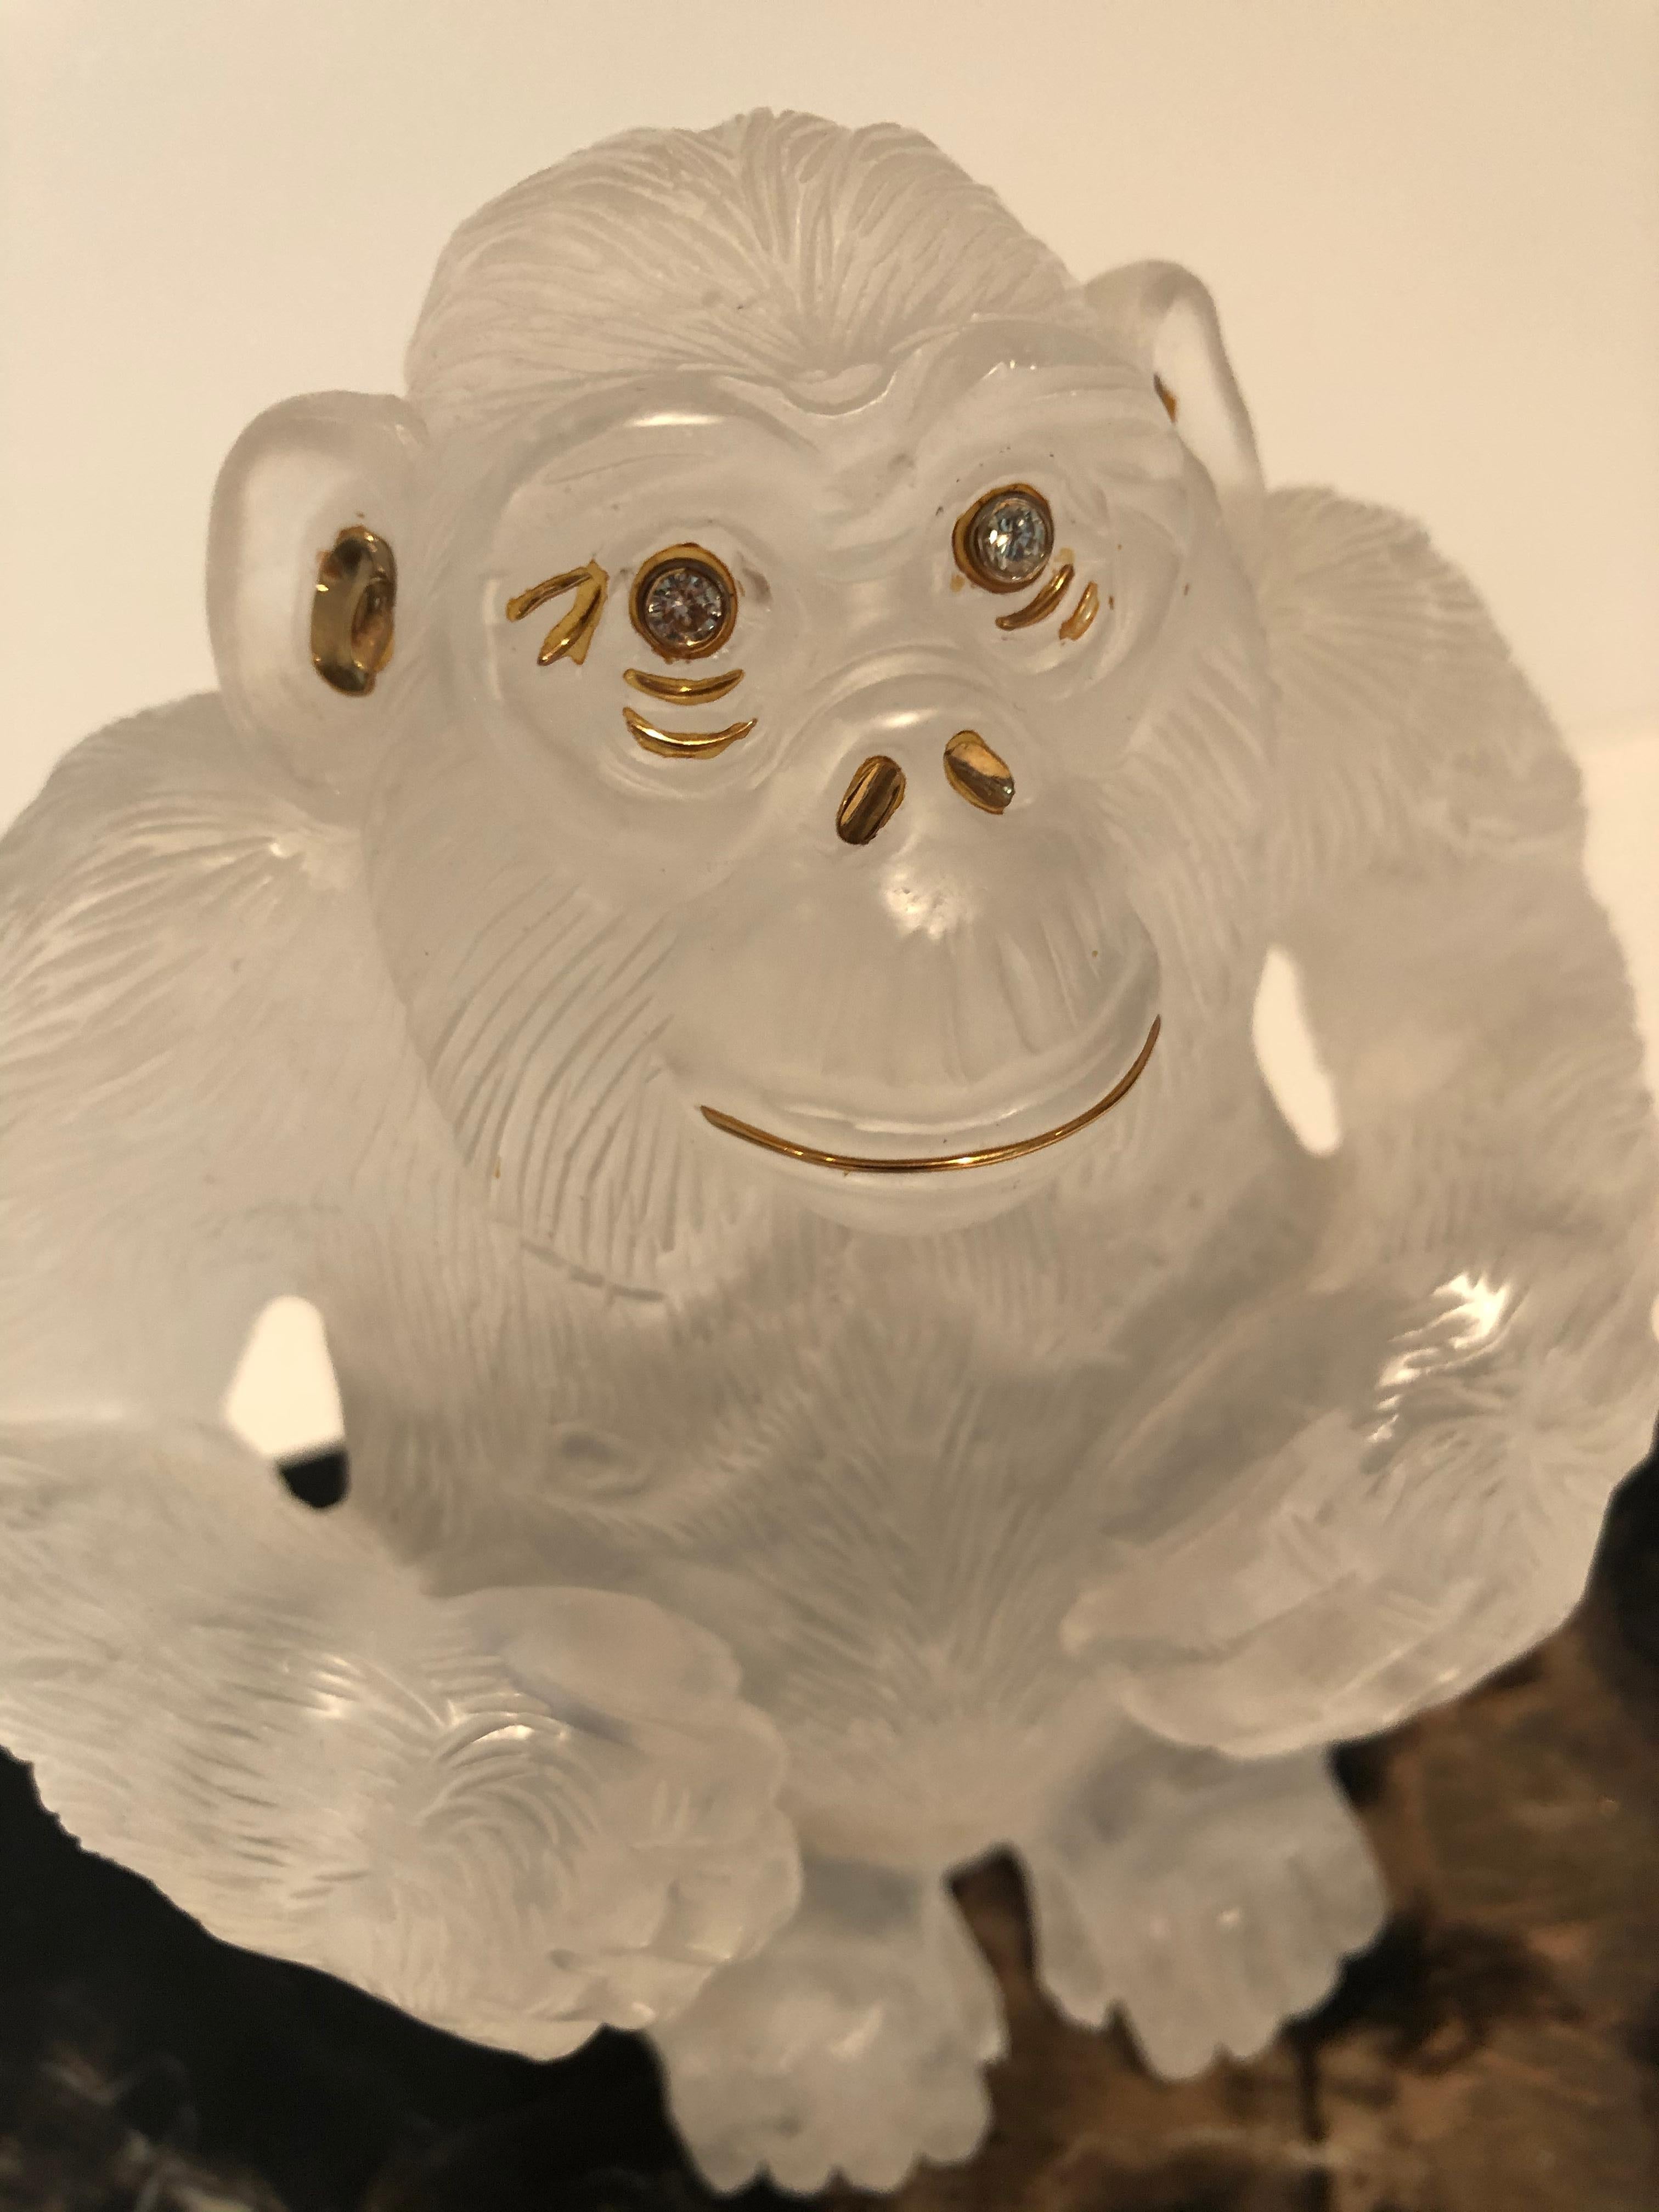 Asprey Carved Rock Crystal Gorilla Diamond Eye's and 18-Karat Gold Accents In Excellent Condition For Sale In Westport, CT